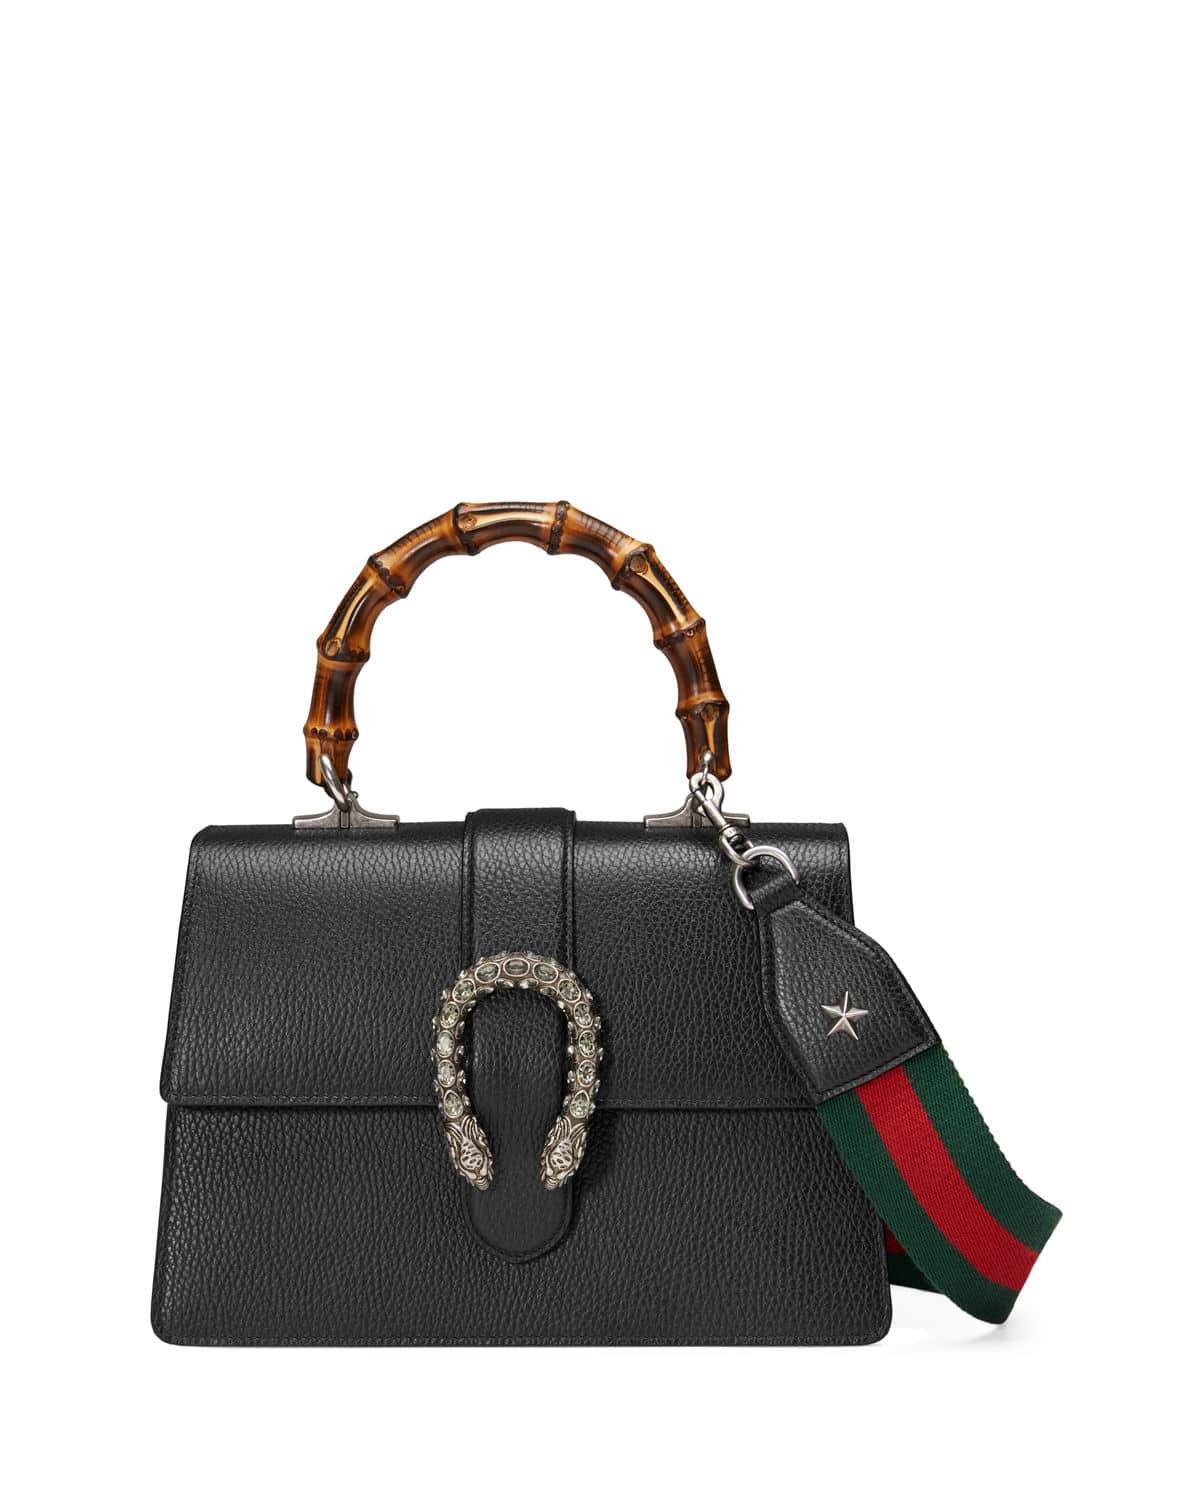 Gucci Resort 2017 Bag Collection – Spotted Fashion